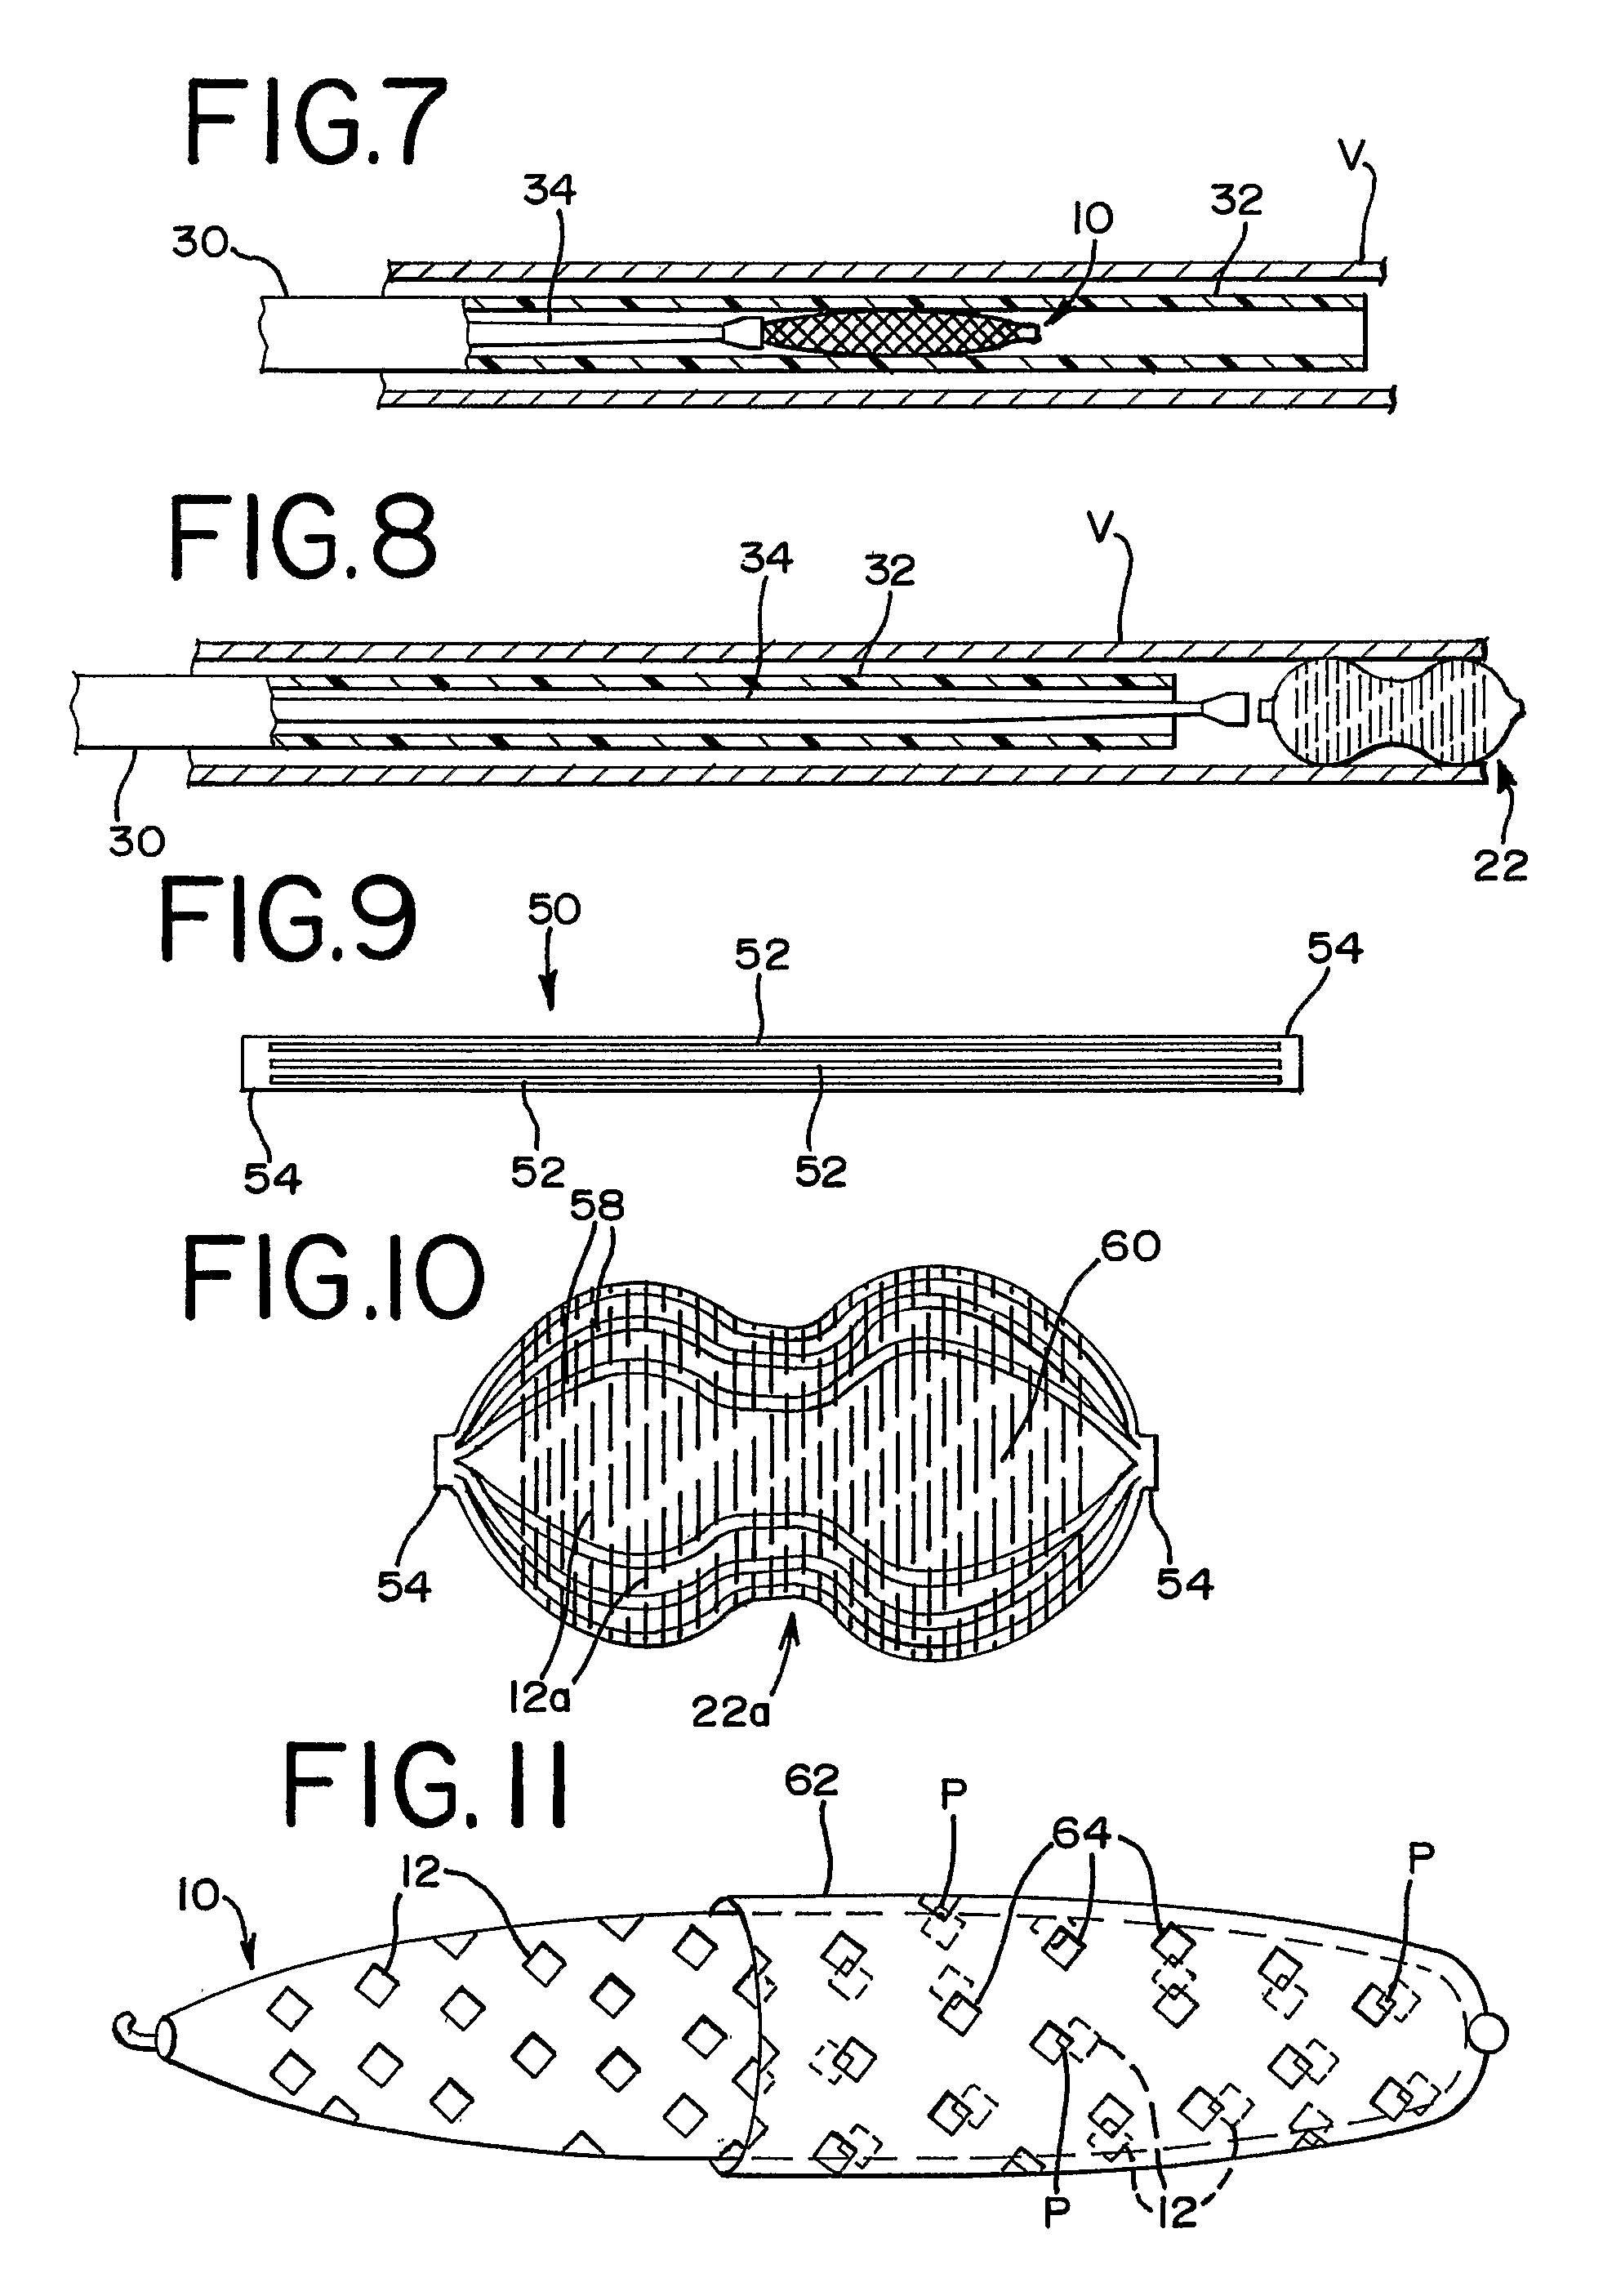 Thin film metallic device for plugging aneurysms or vessels